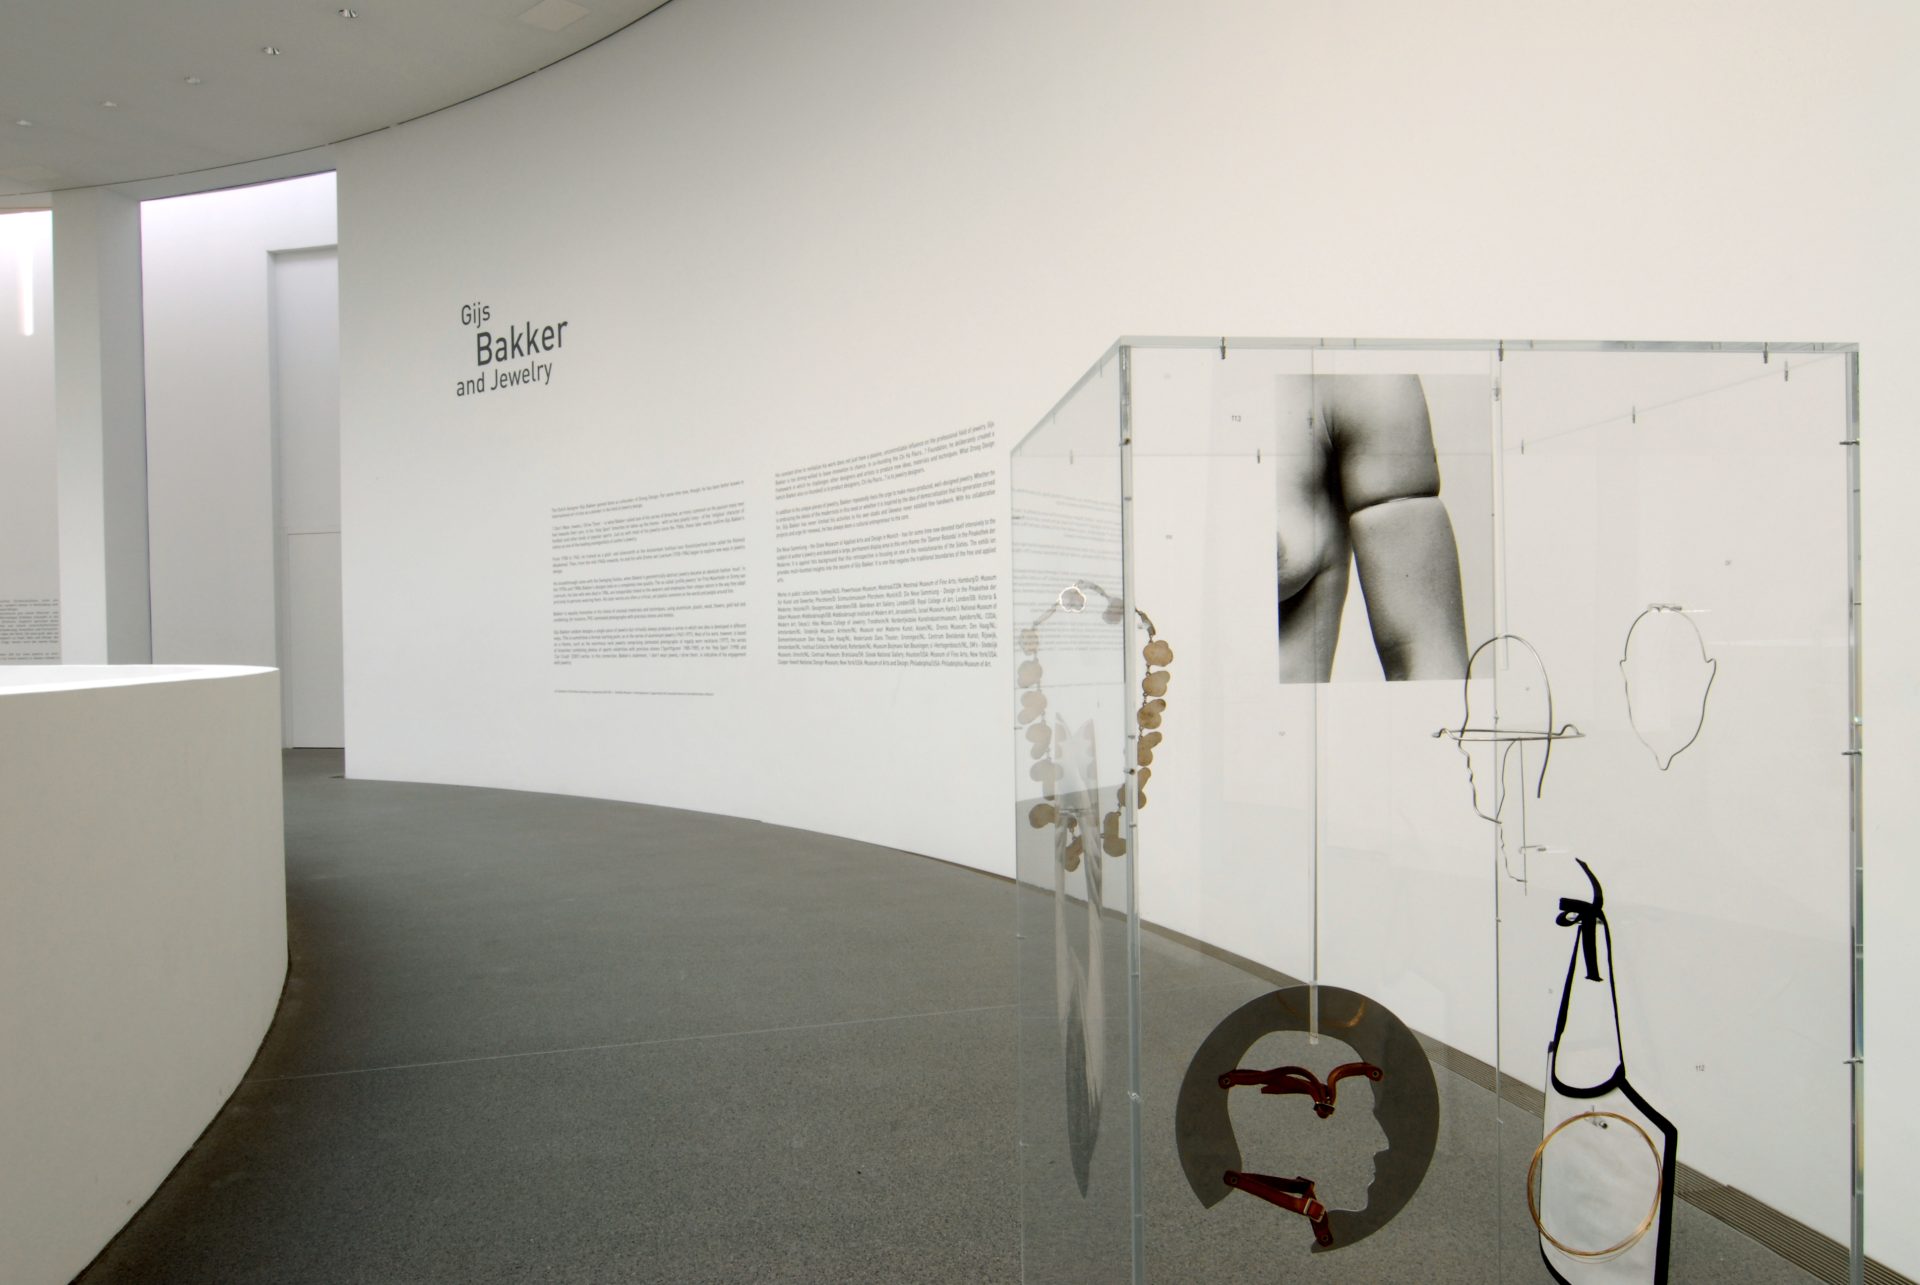 The picture shows the wall text of the exhibition. To the right in front of it is a tall glass display case with an installation of various floating metal objects and a black-and-white print of a body section. This one shows a bare shoulder with upper arm and chest. There is a bracelet on the upper arm.